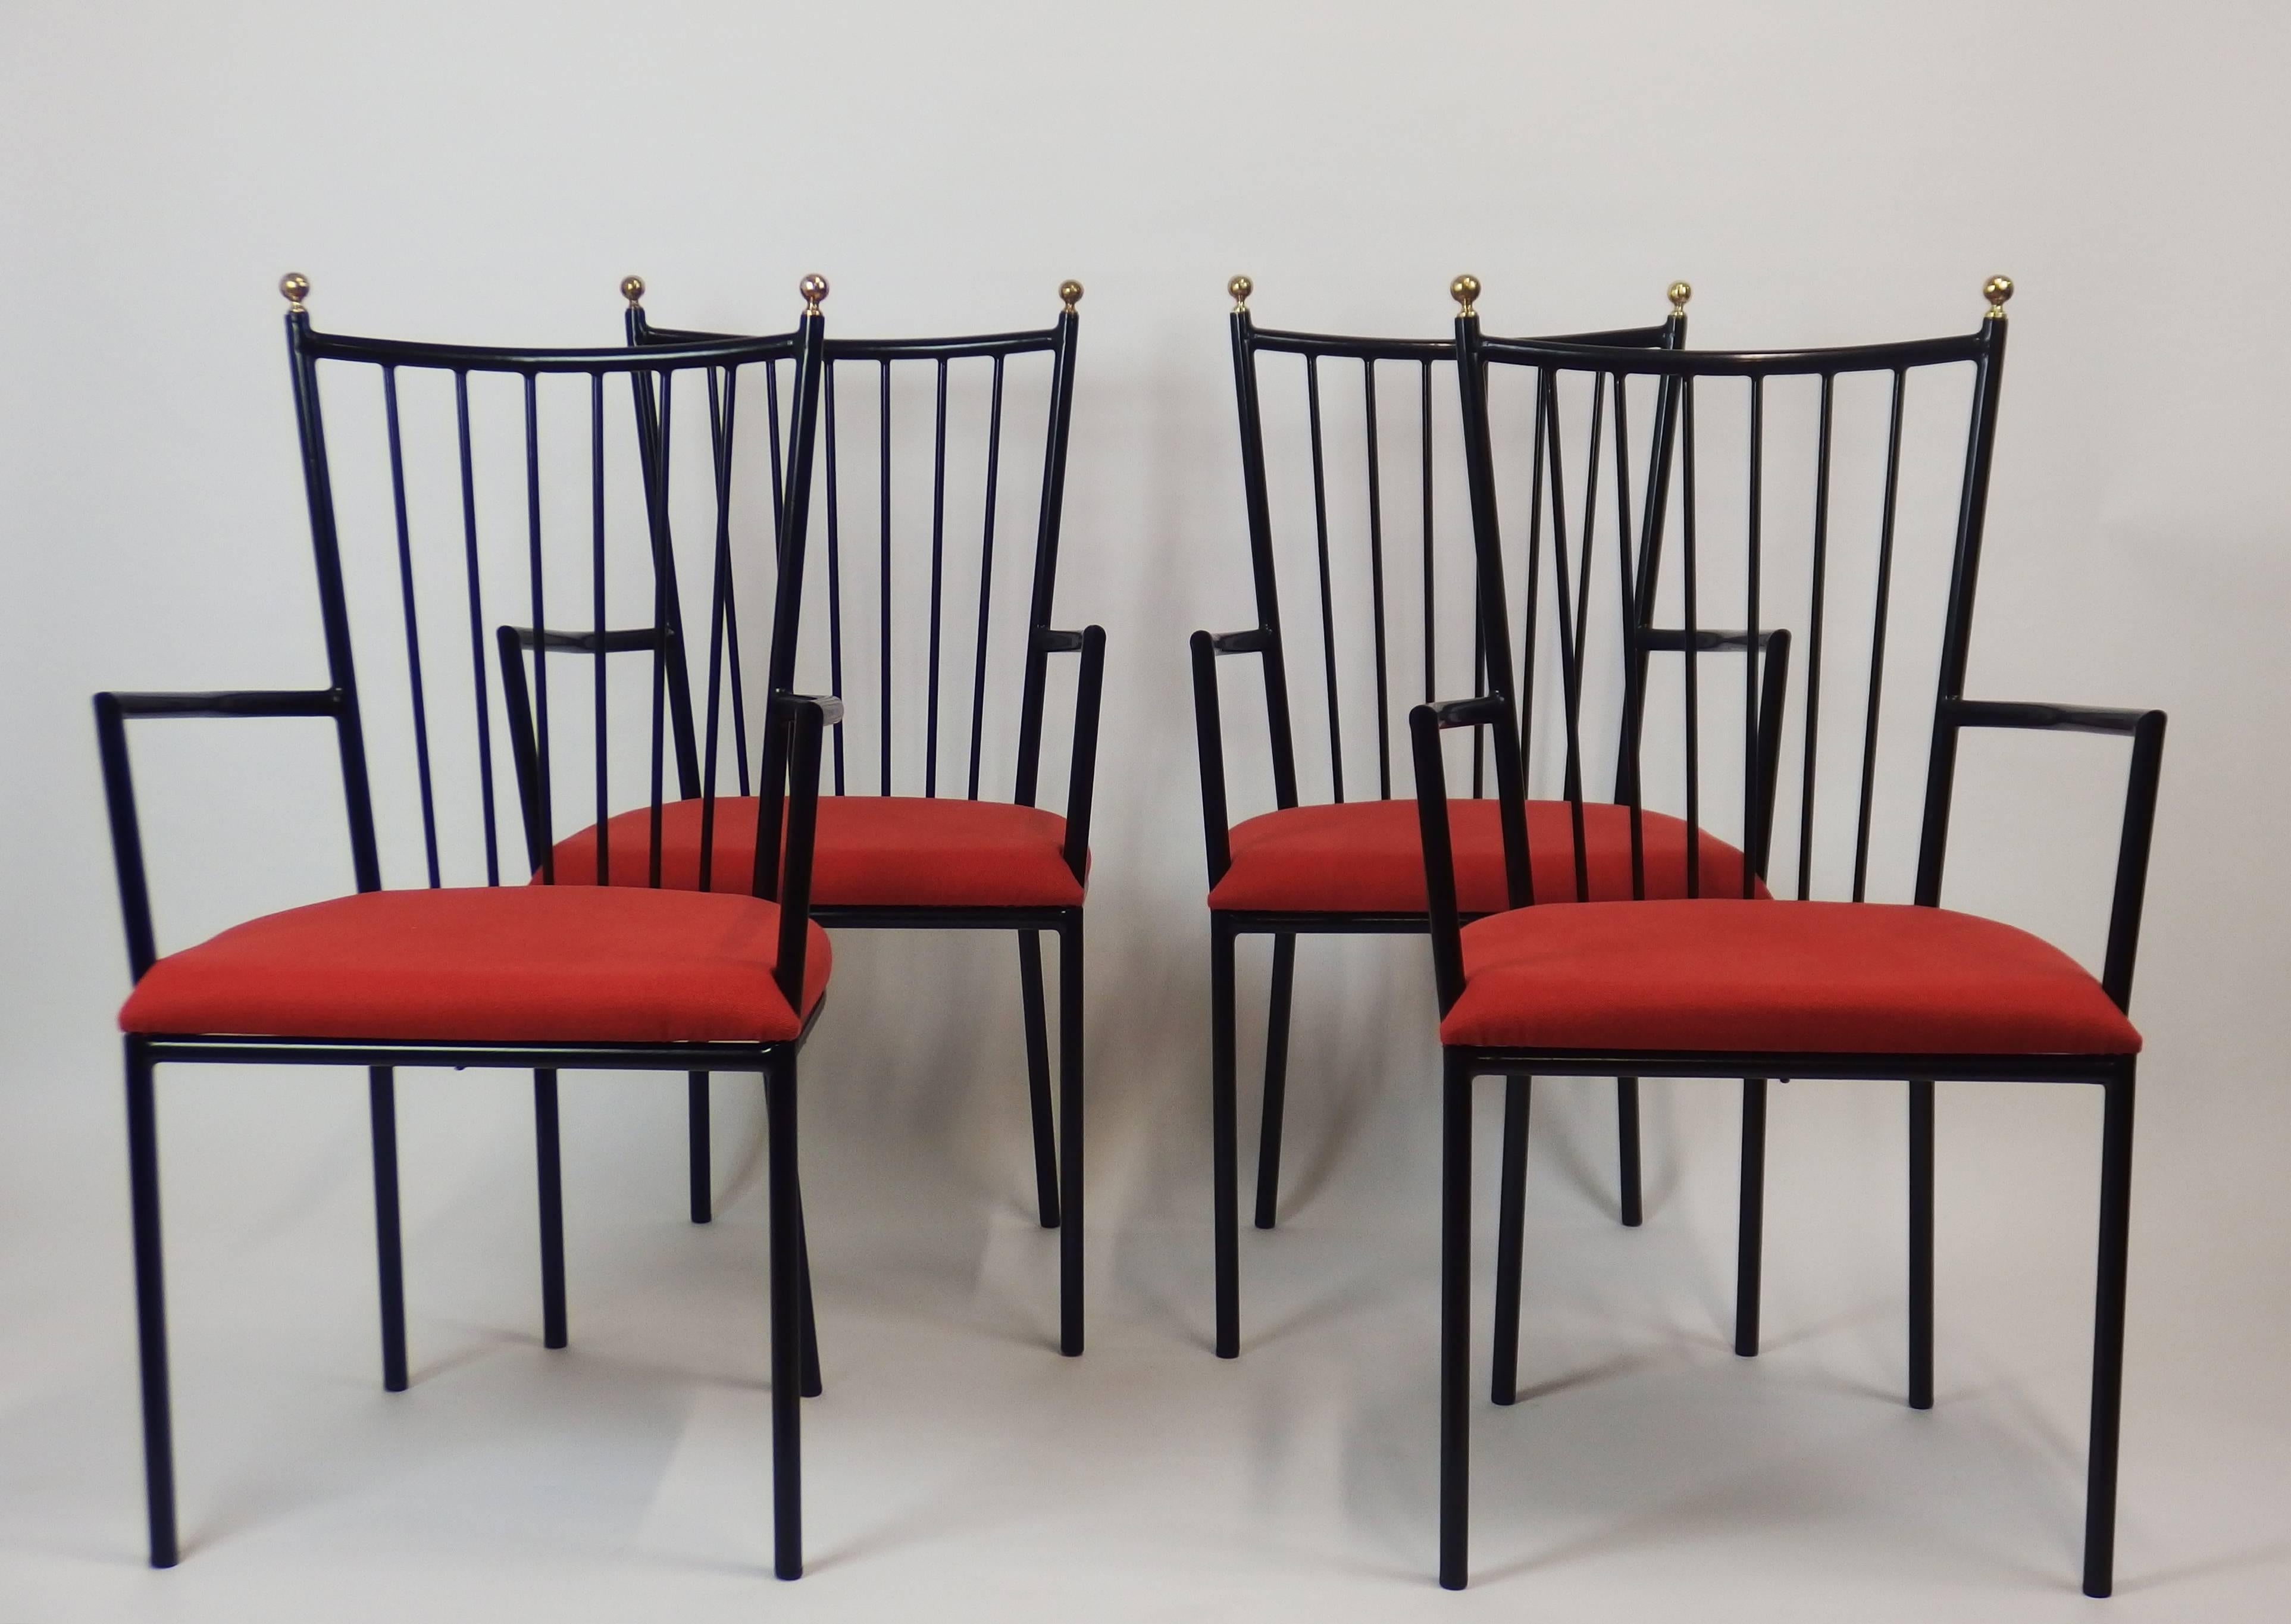 Set of four armchairs with a black enameled tubular iron structure and brass knobs on the top of the backs. Designed by Colette Gueden in the 1950s.
Measure: Seats height 18.5in.